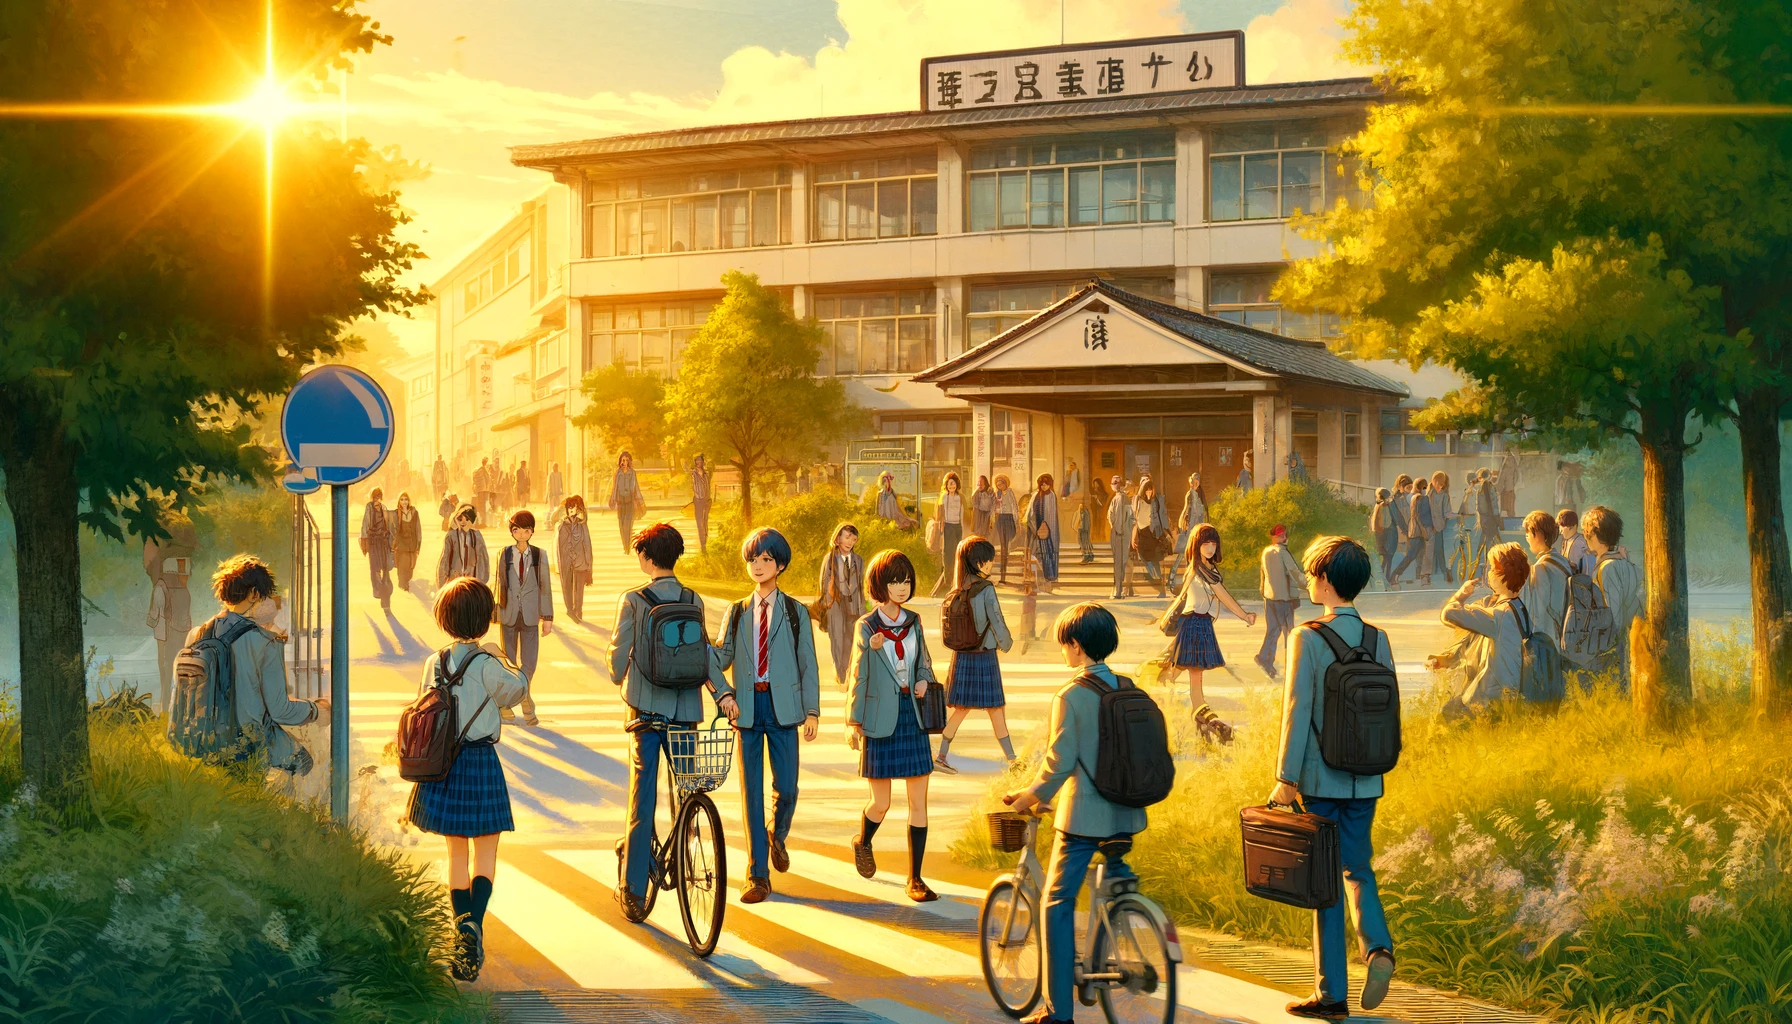 A vibrant morning scene at Midorigaoka High School featuring students commuting to school. The image captures students walking and biking along a scenic path that leads to the school entrance. The students are chatting happily, some riding bicycles, others walking in groups or alone, all dressed in the school's distinct uniform. The background shows the school’s facade, bathed in morning light, creating a welcoming atmosphere. The word 'MIDORIGAOKA' is prominently displayed, emphasizing the school's strong sense of community and academic pride.